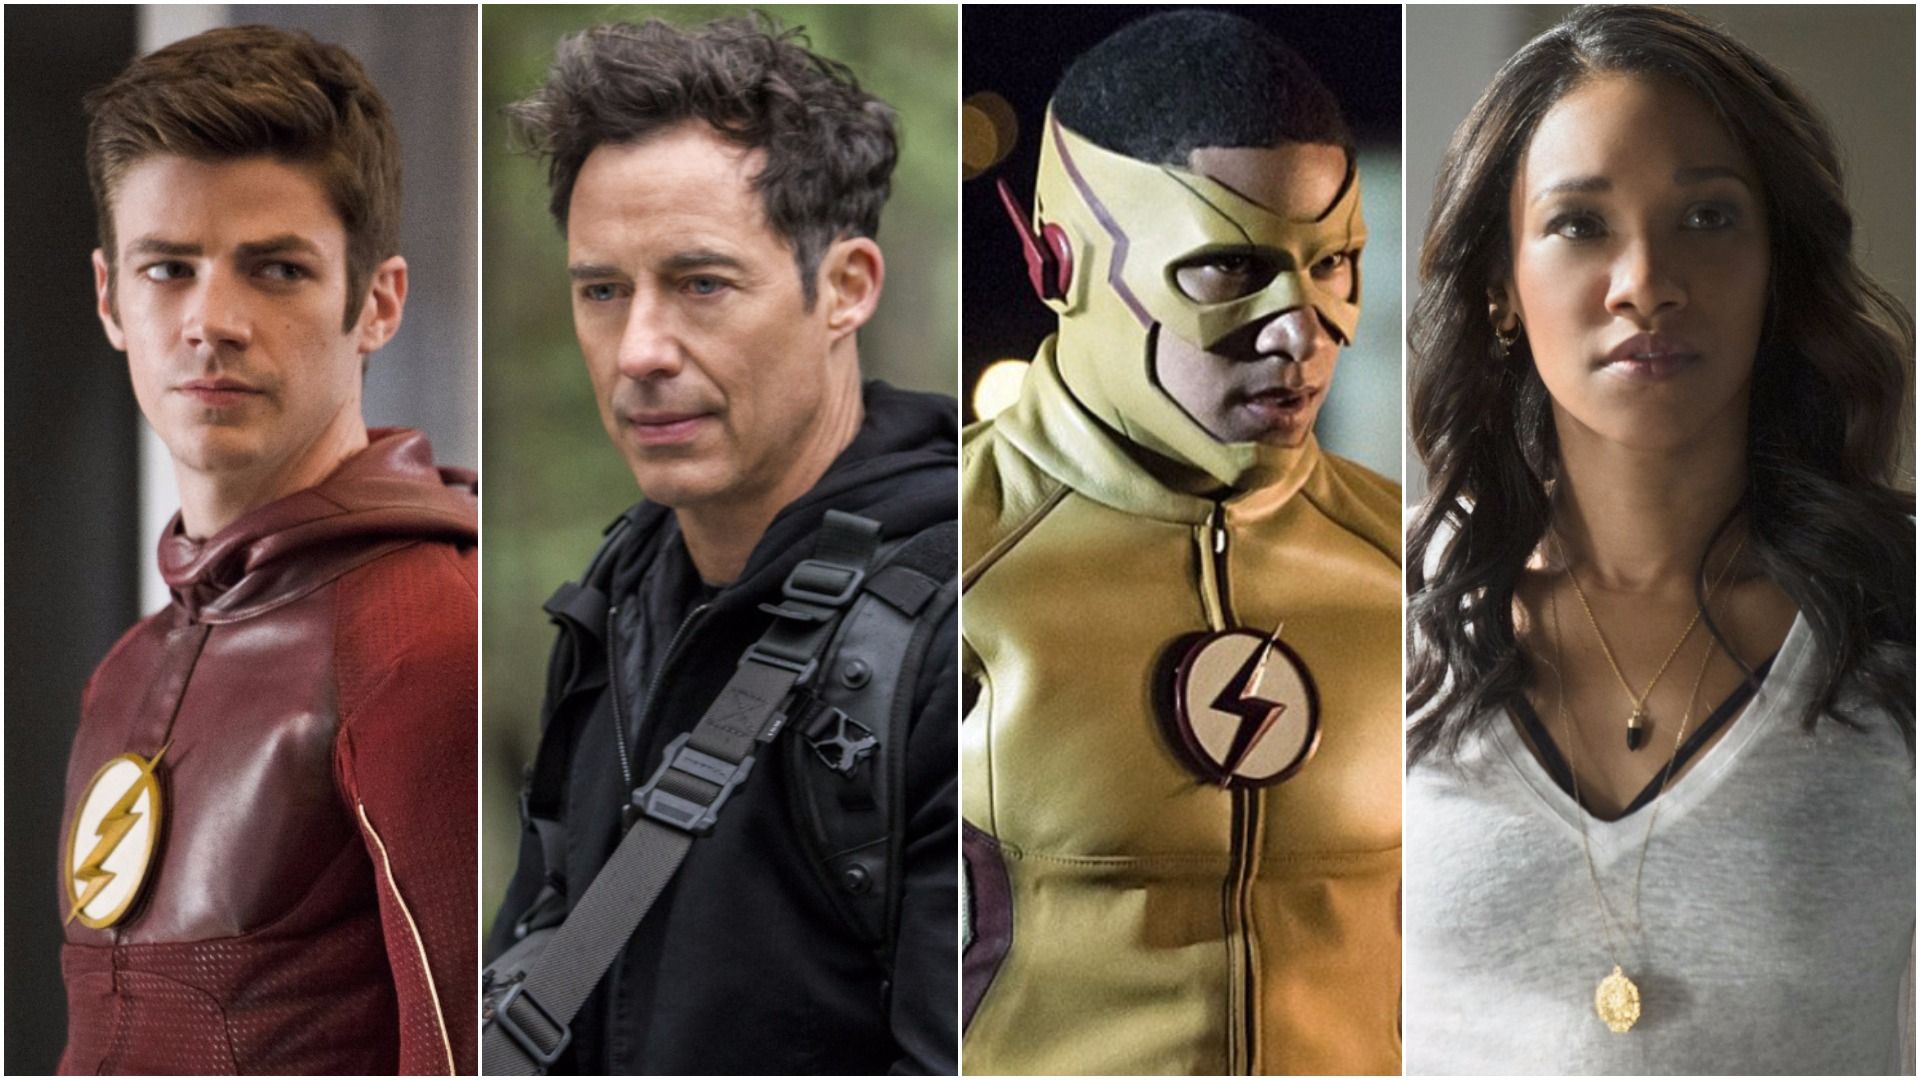 The Flash season 4: New episodes, release date, cast, villain and